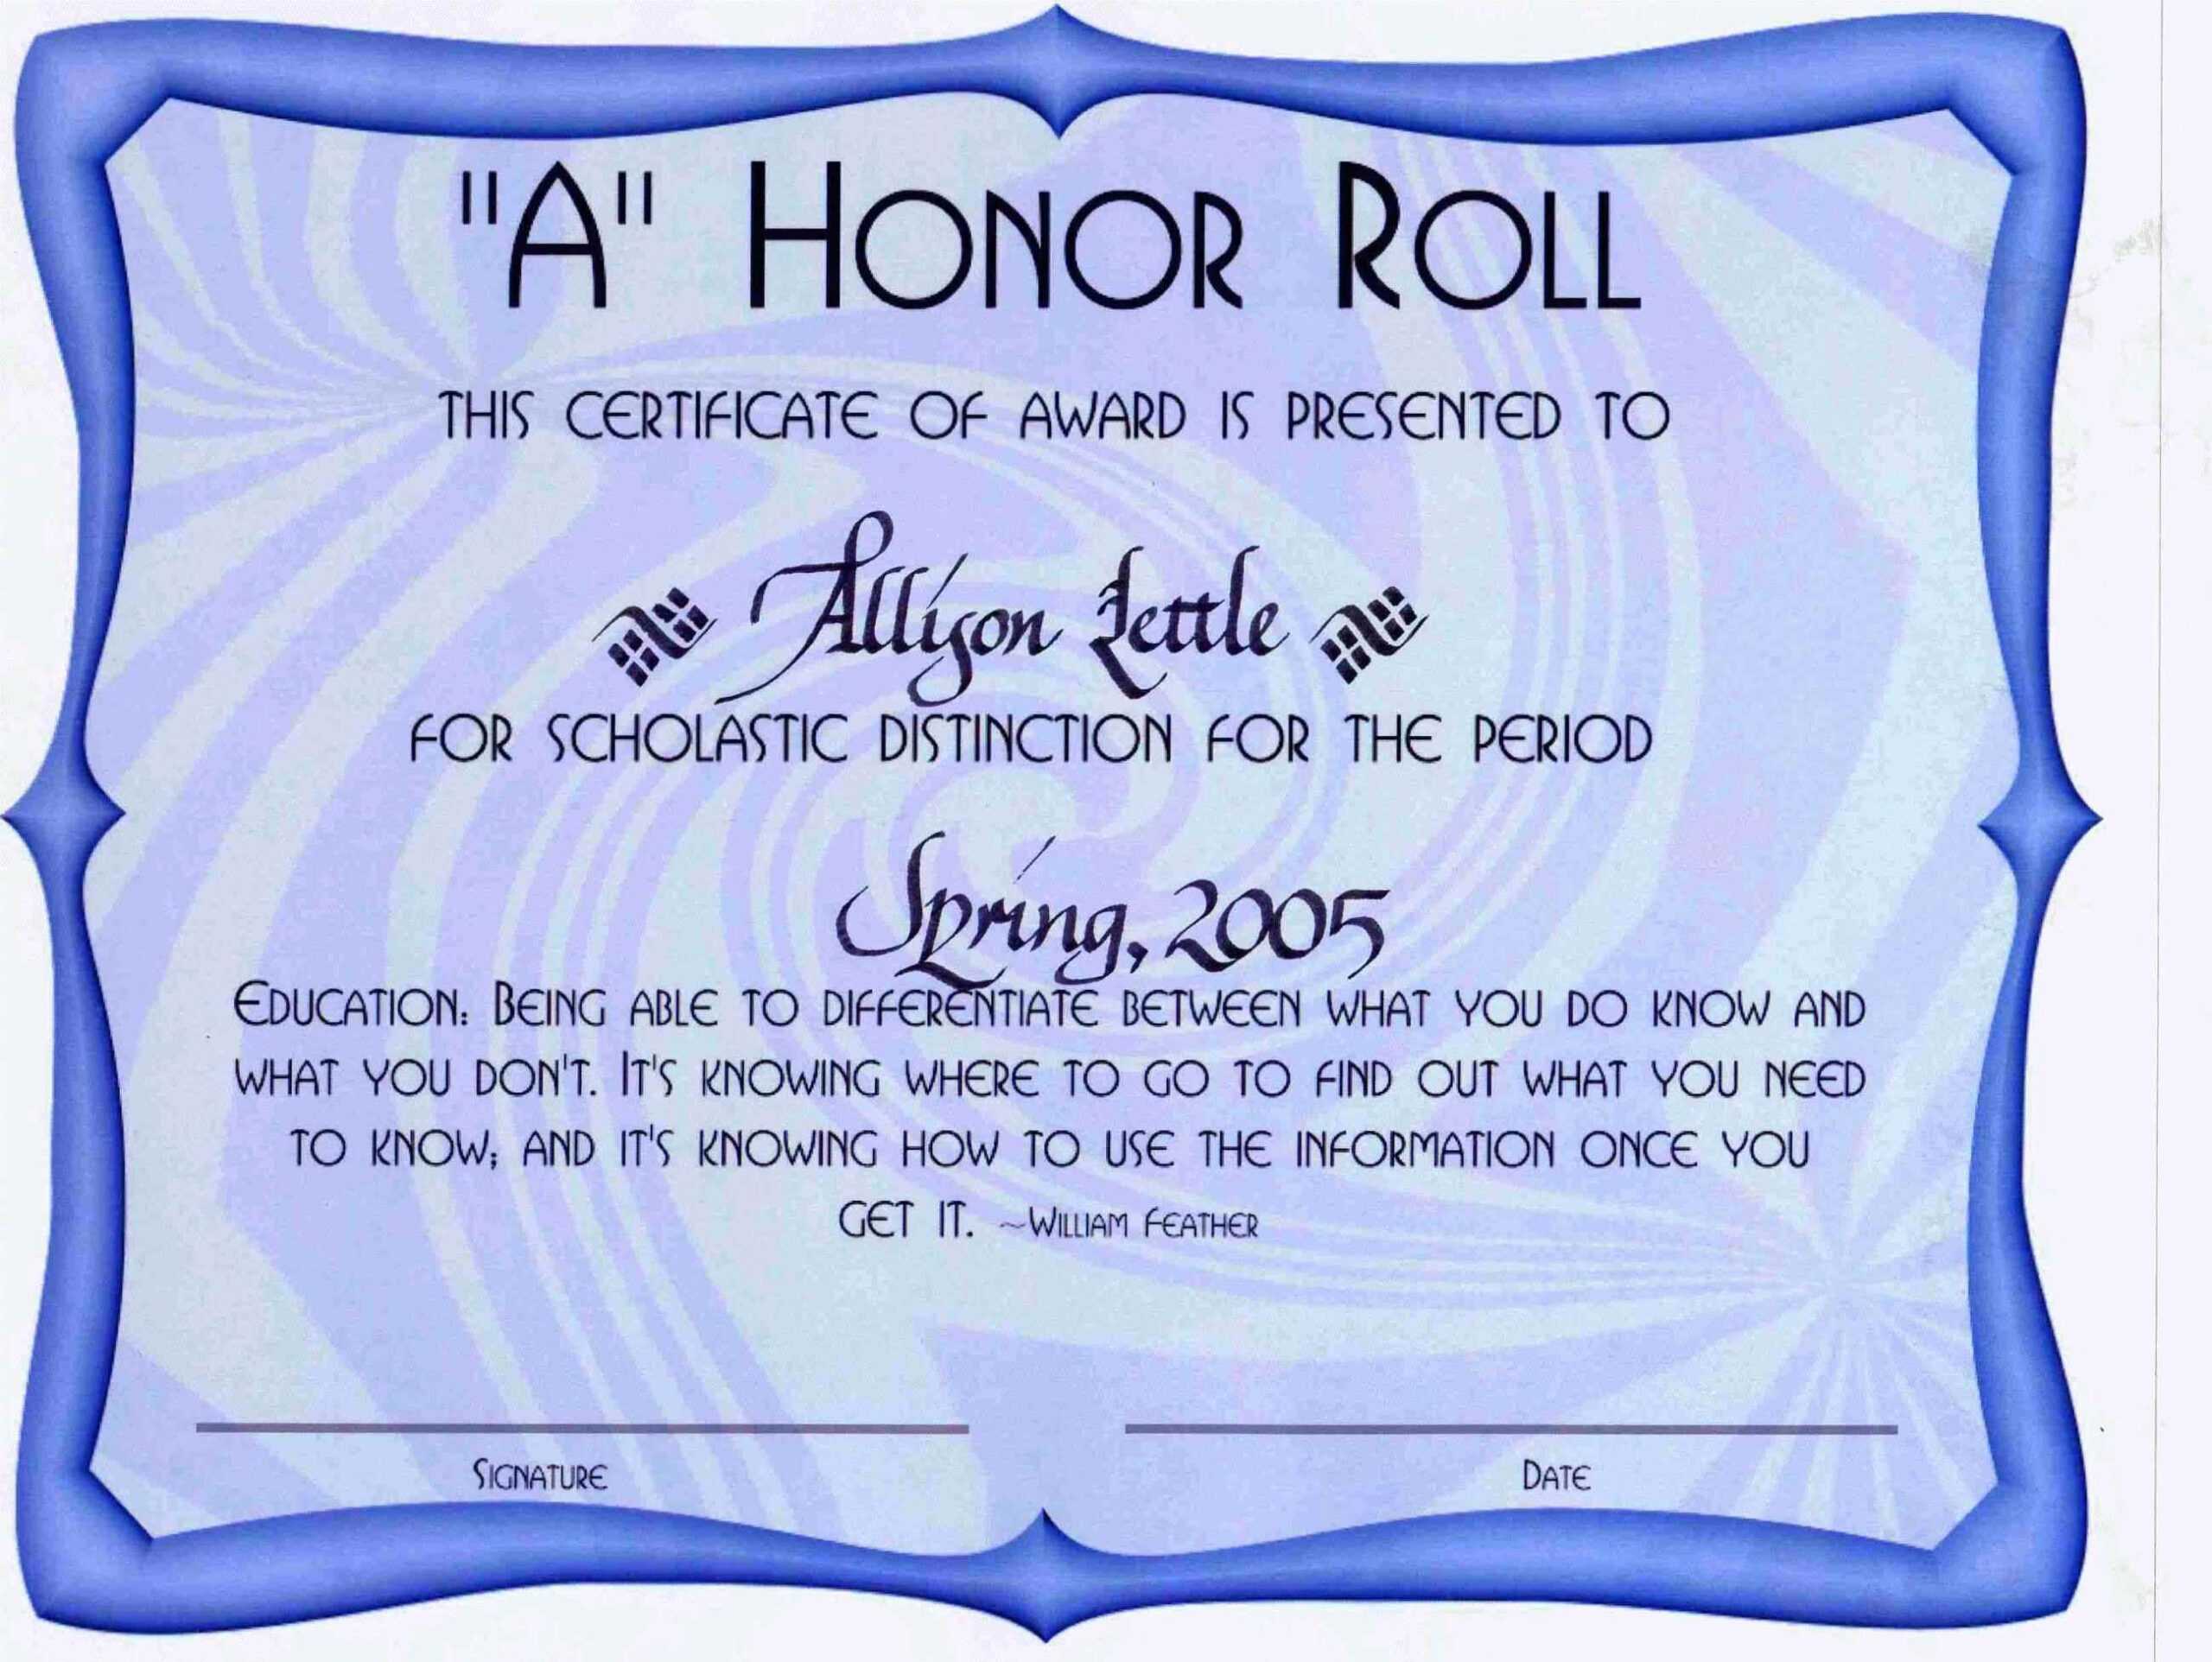 30 Honor Roll Certificate Template | Pryncepality Pertaining To Honor Roll Certificate Template